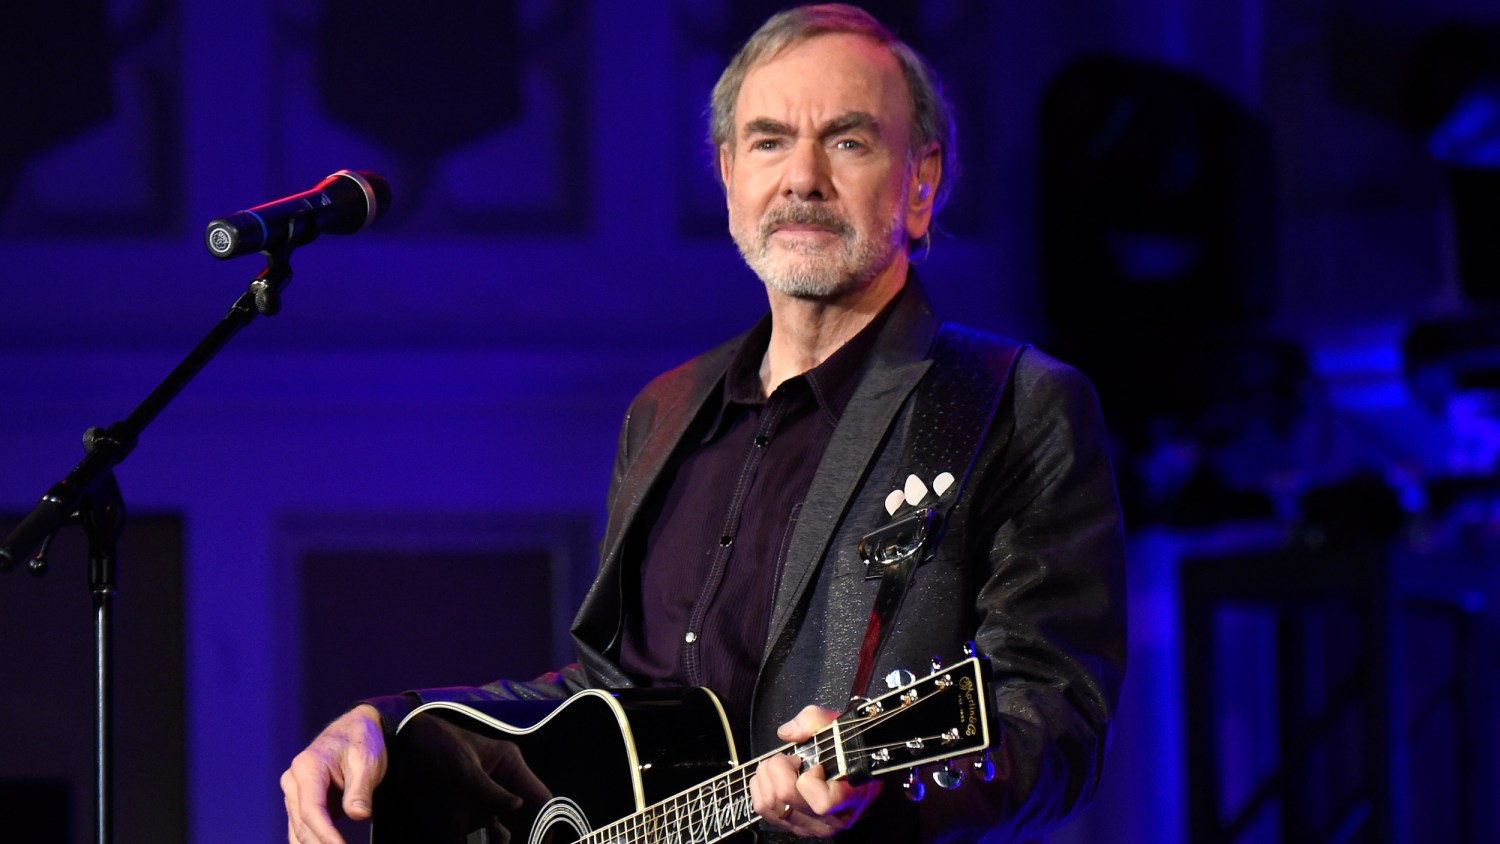 Neil Diamond gives a surprise performance at Broadway opening five years  after retiring due to Parkinson's